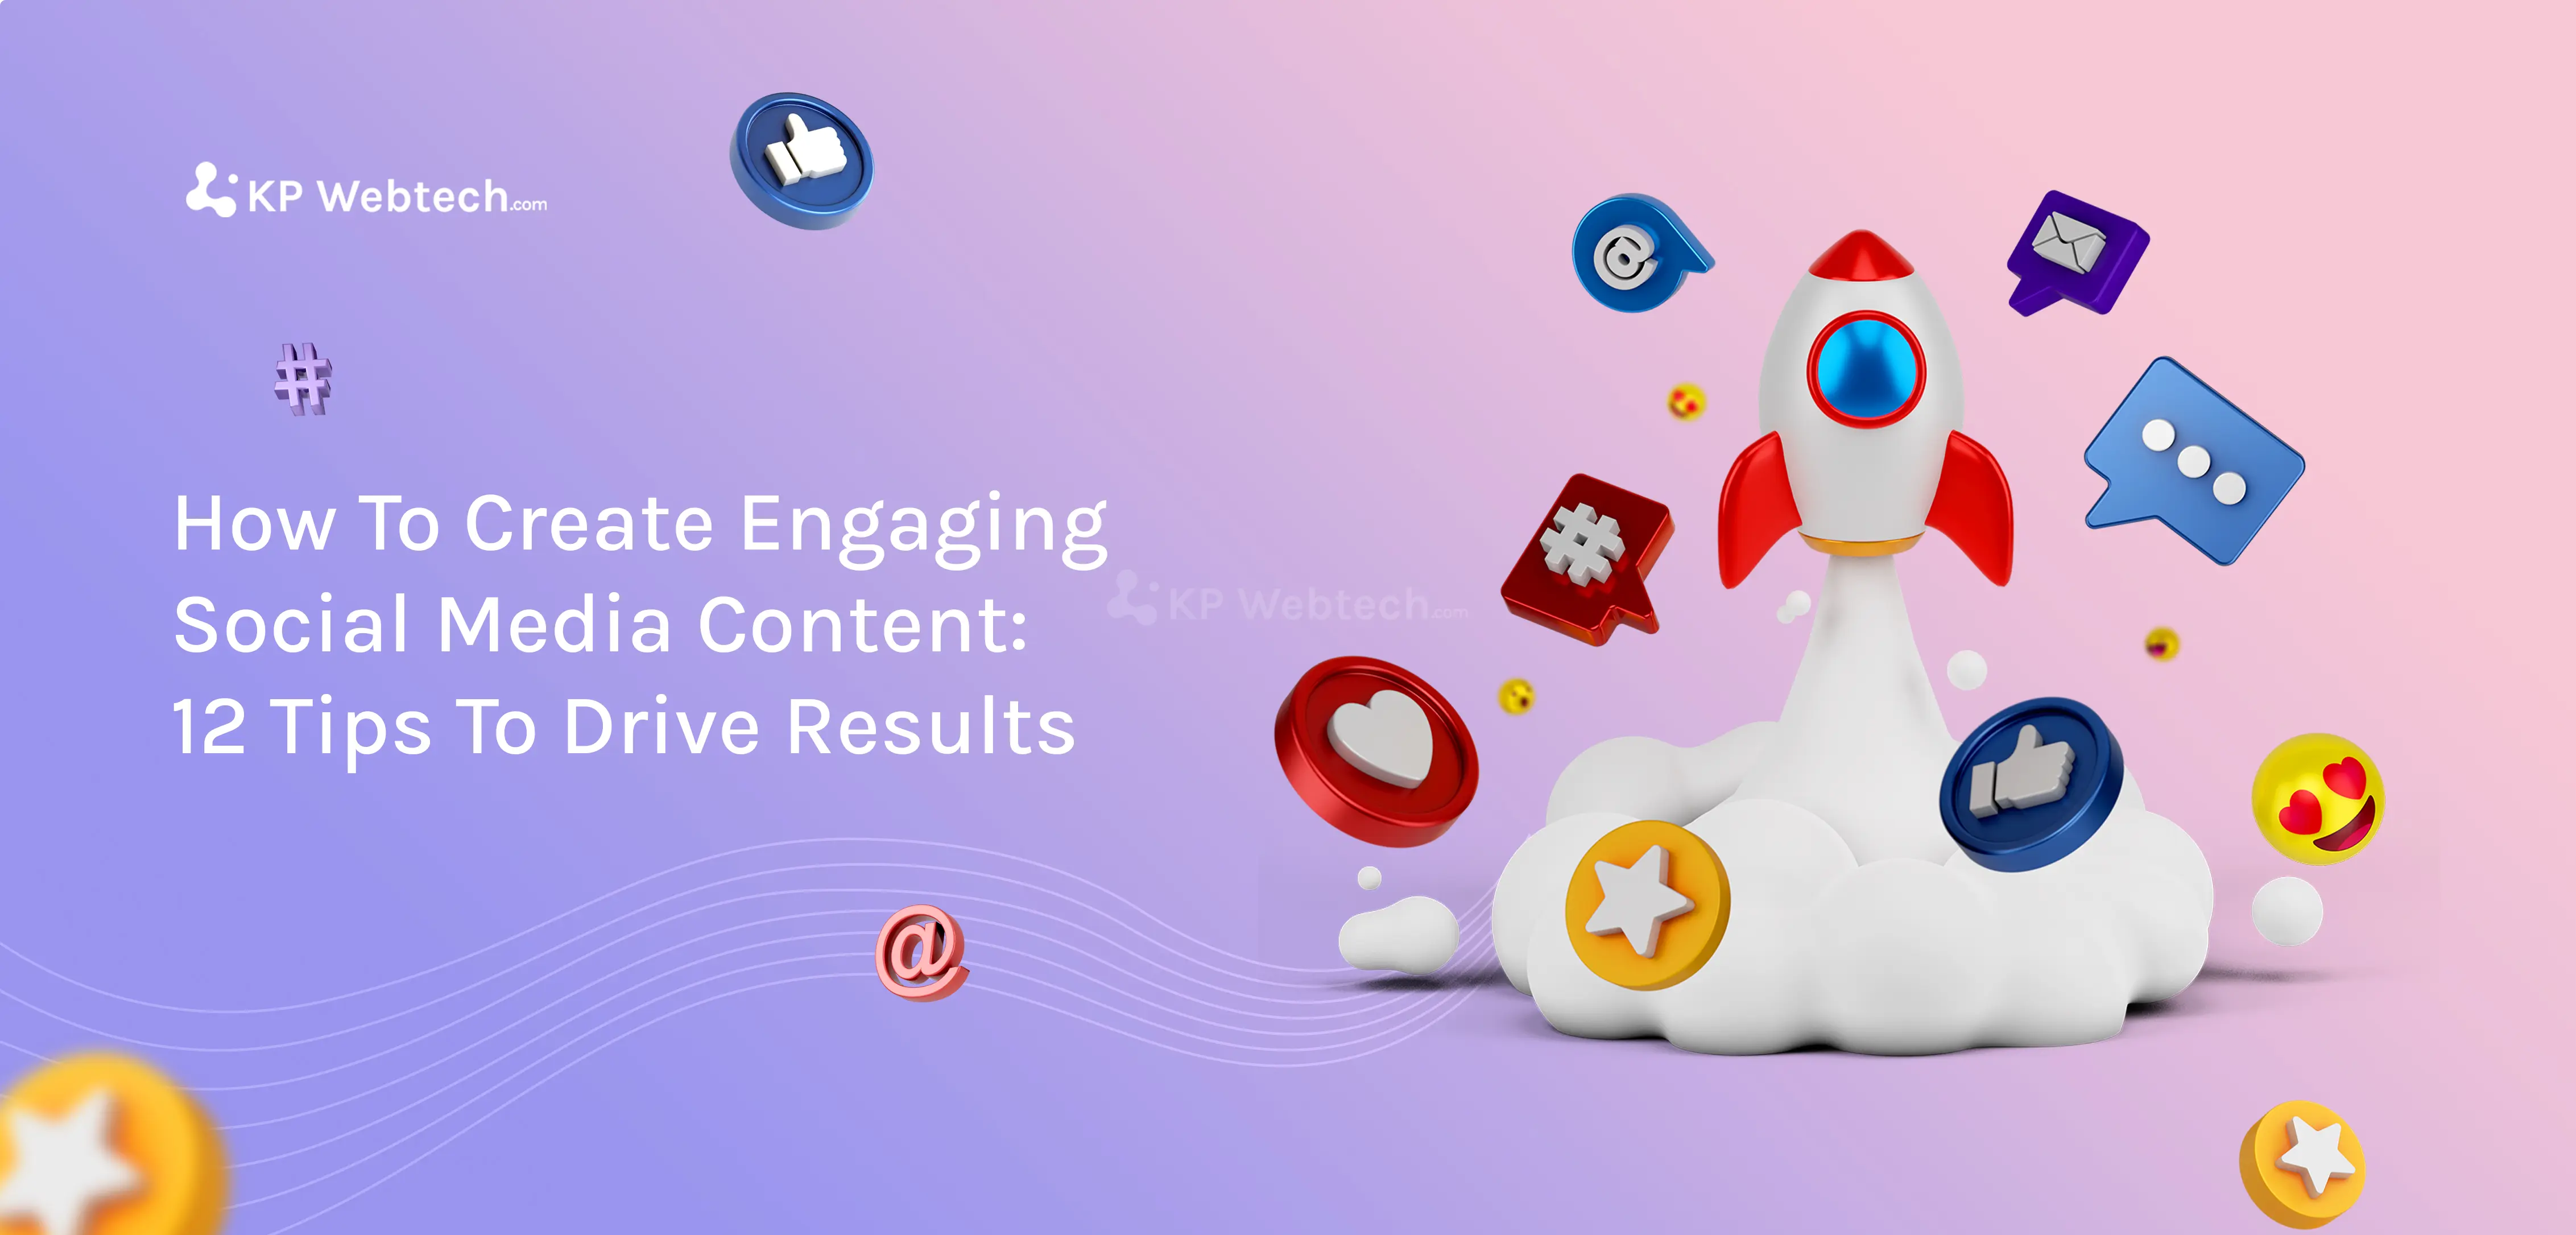 12 Tips for Creating Engaging Social Media Content That Gets Results